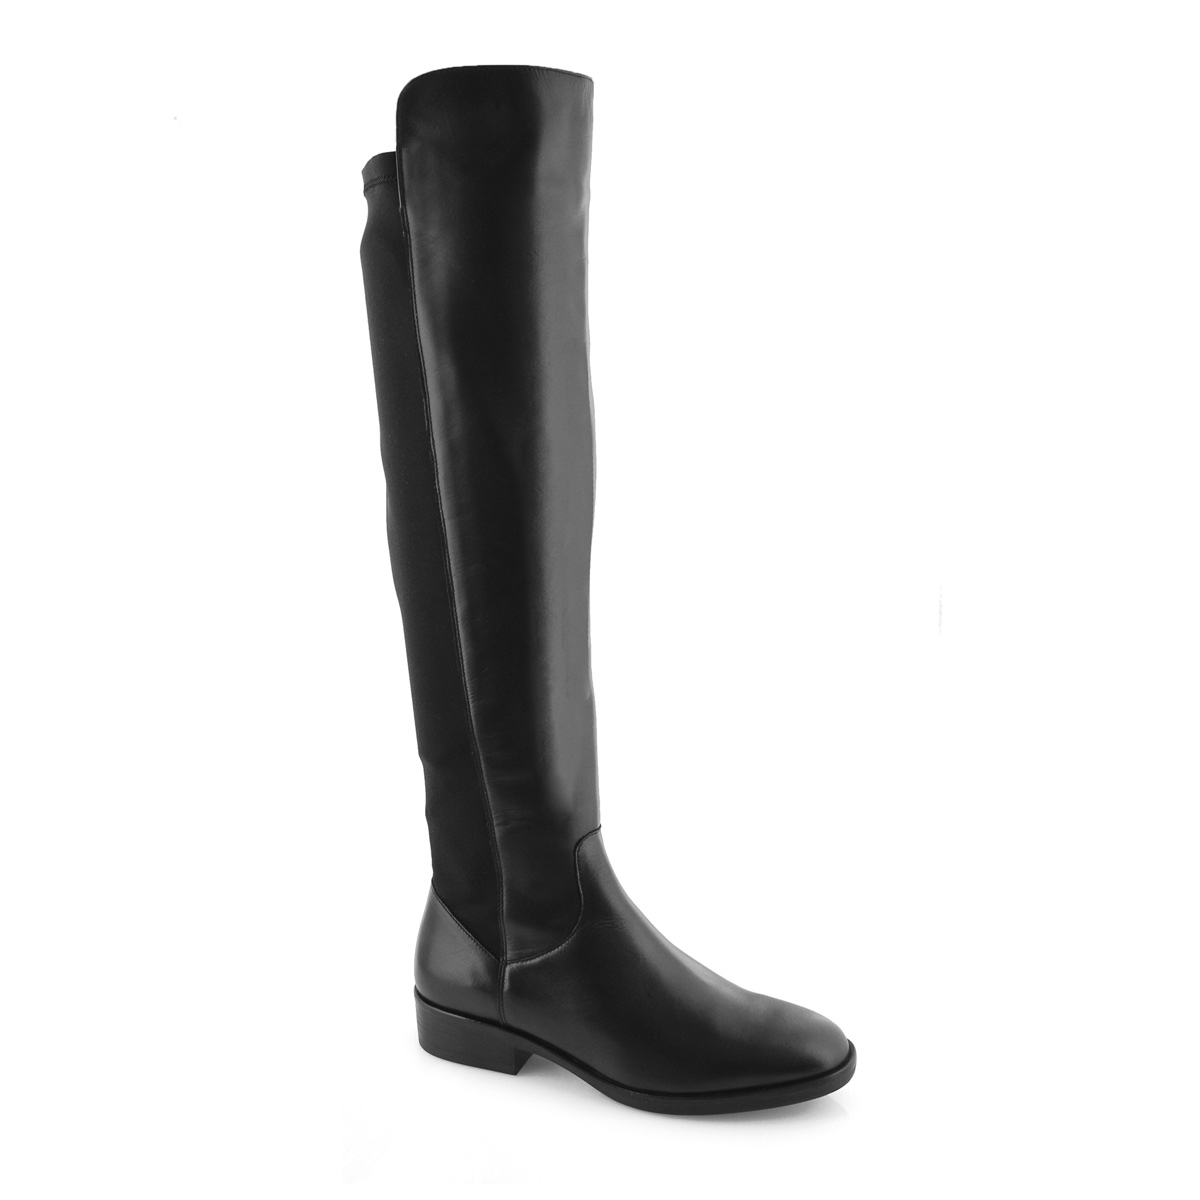 Clarks Women's PURE CADDY black leather tall | SoftMoc.com